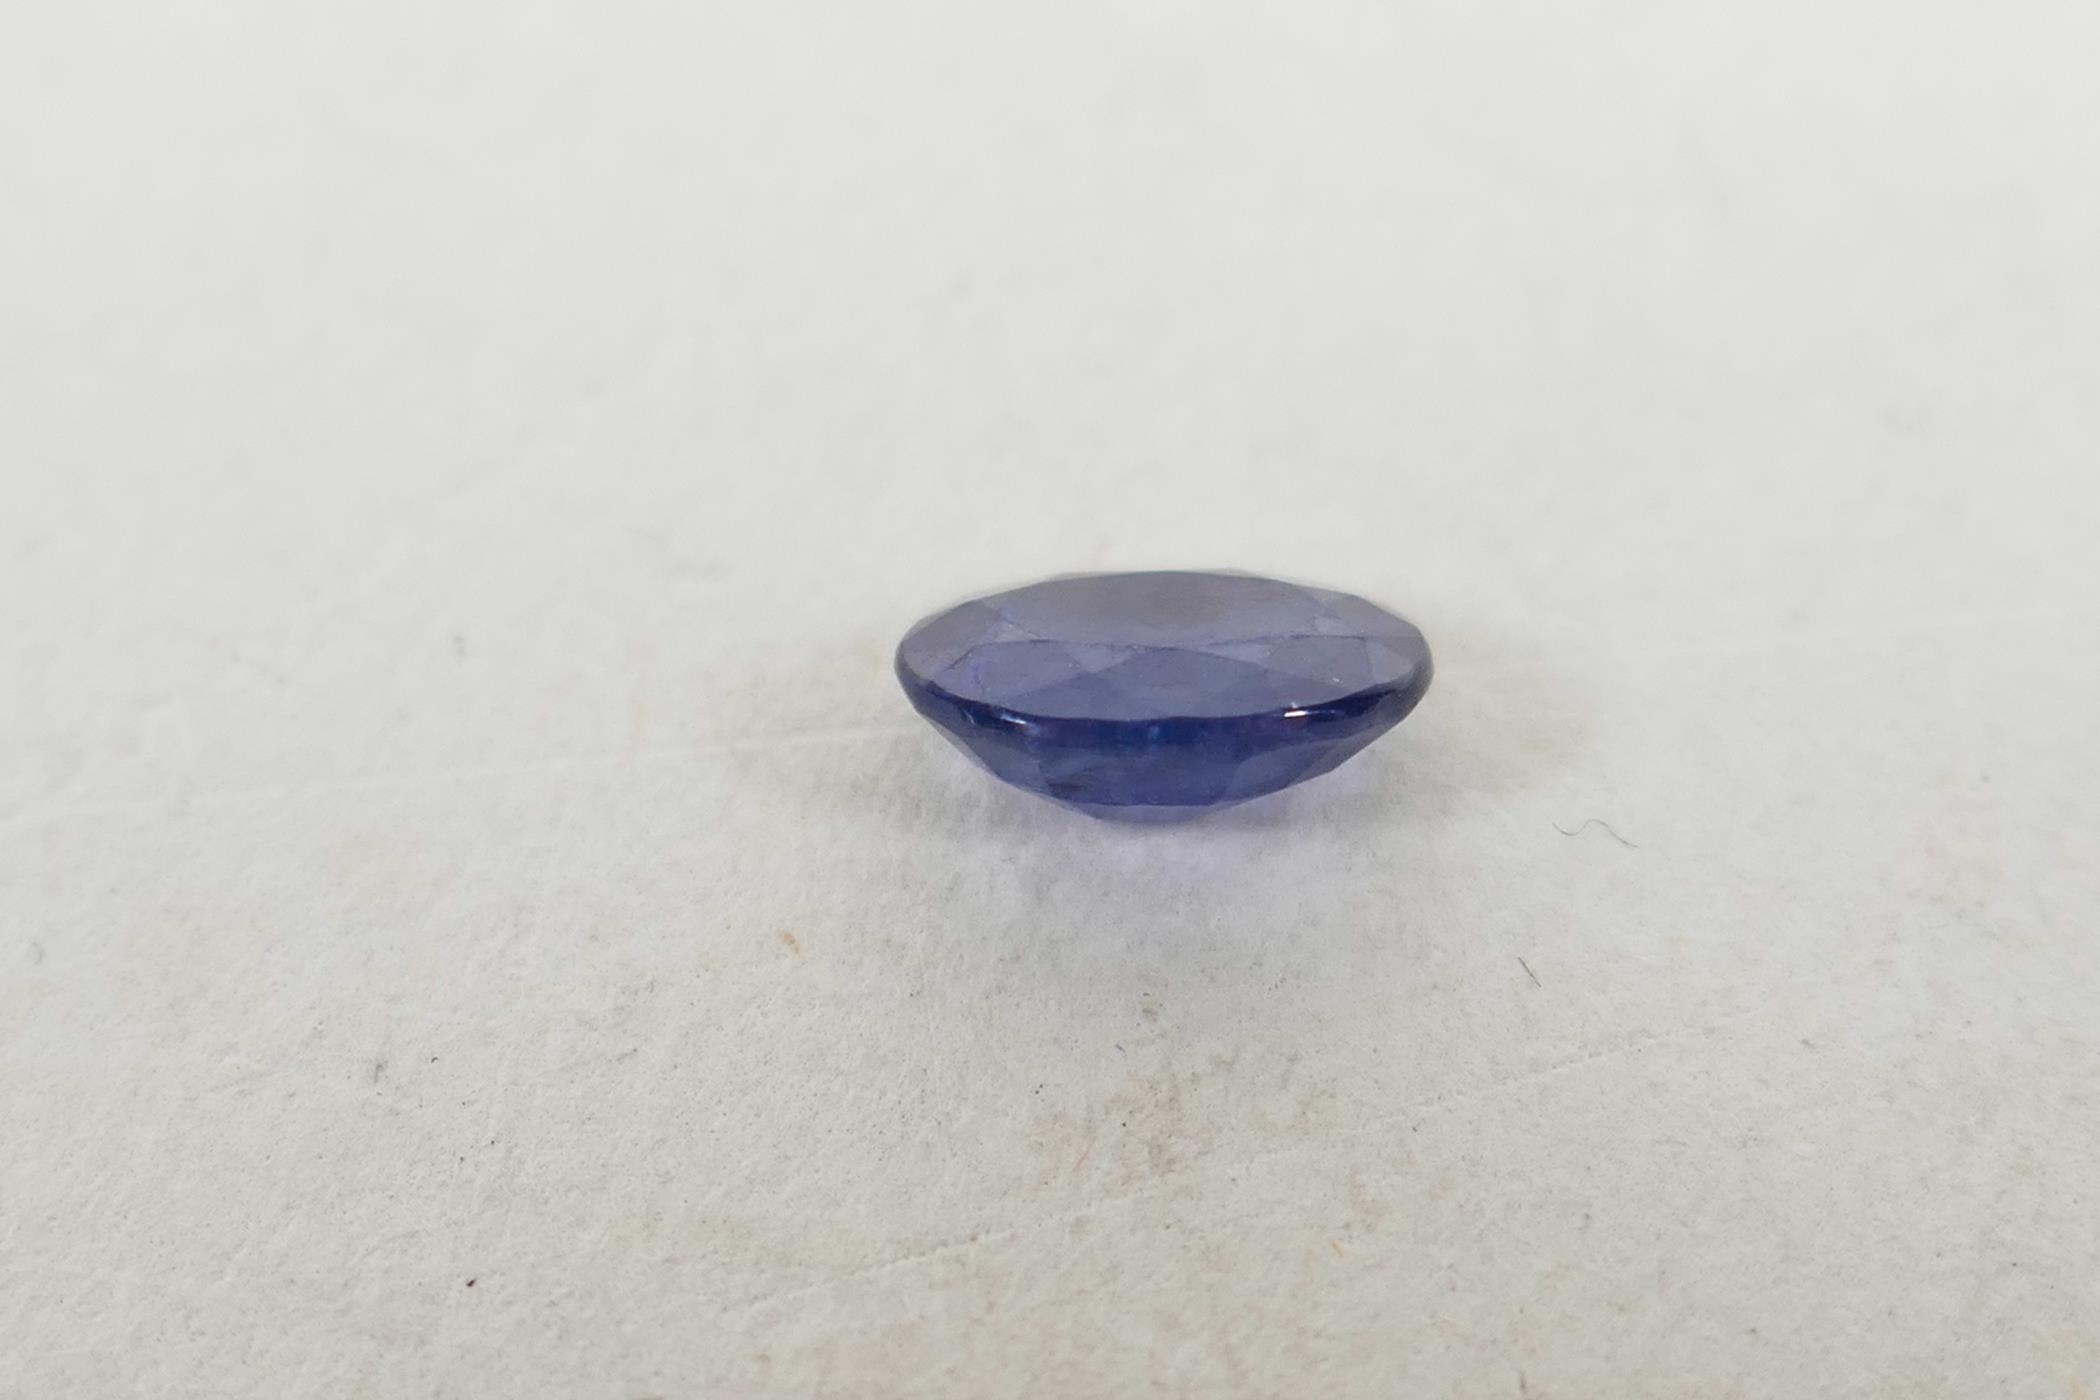 A 1.06ct blue sapphire, oval mixed cut, ITLGR certified, with certificate - Image 2 of 7